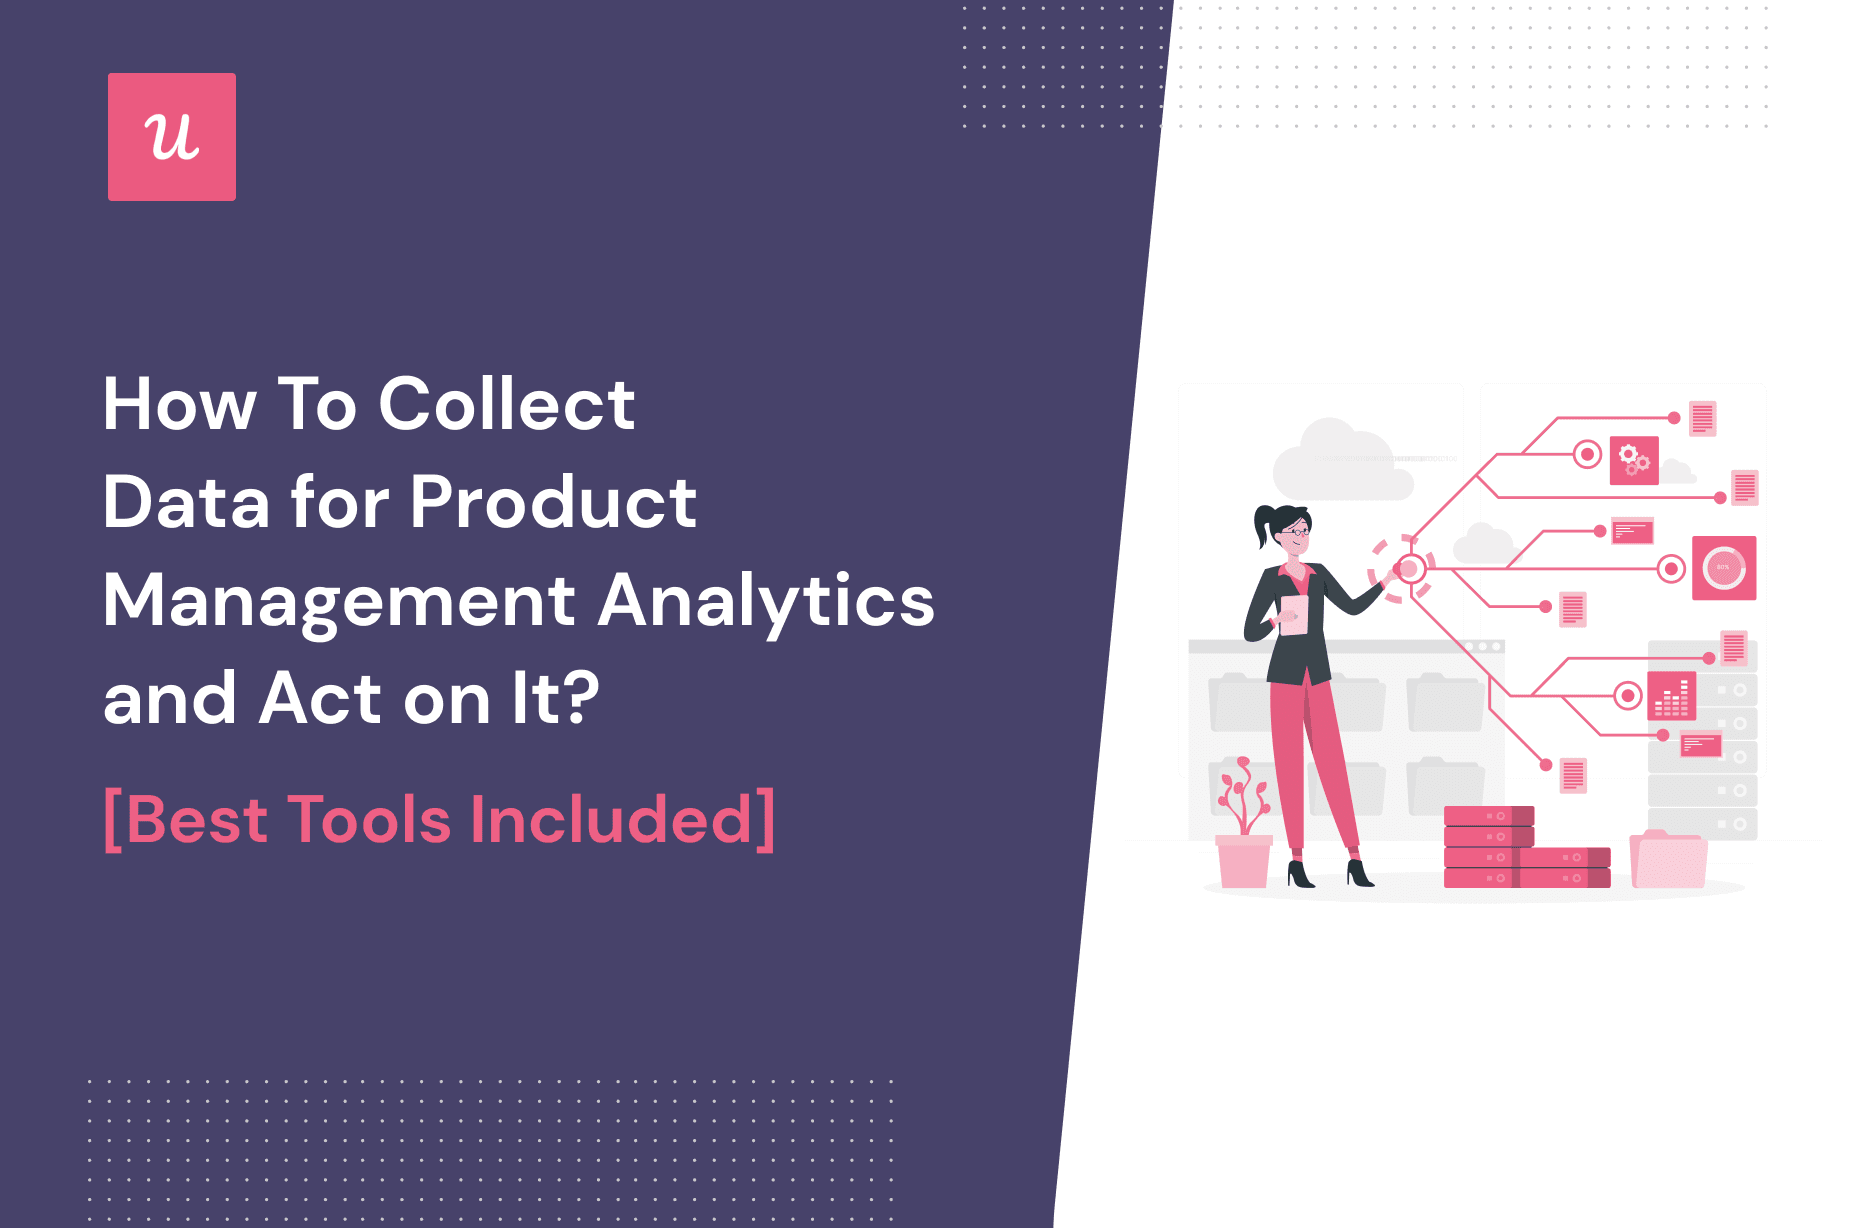 How-To-Collect-Data-for-Product-Management-Analytics-and-Act-on-It